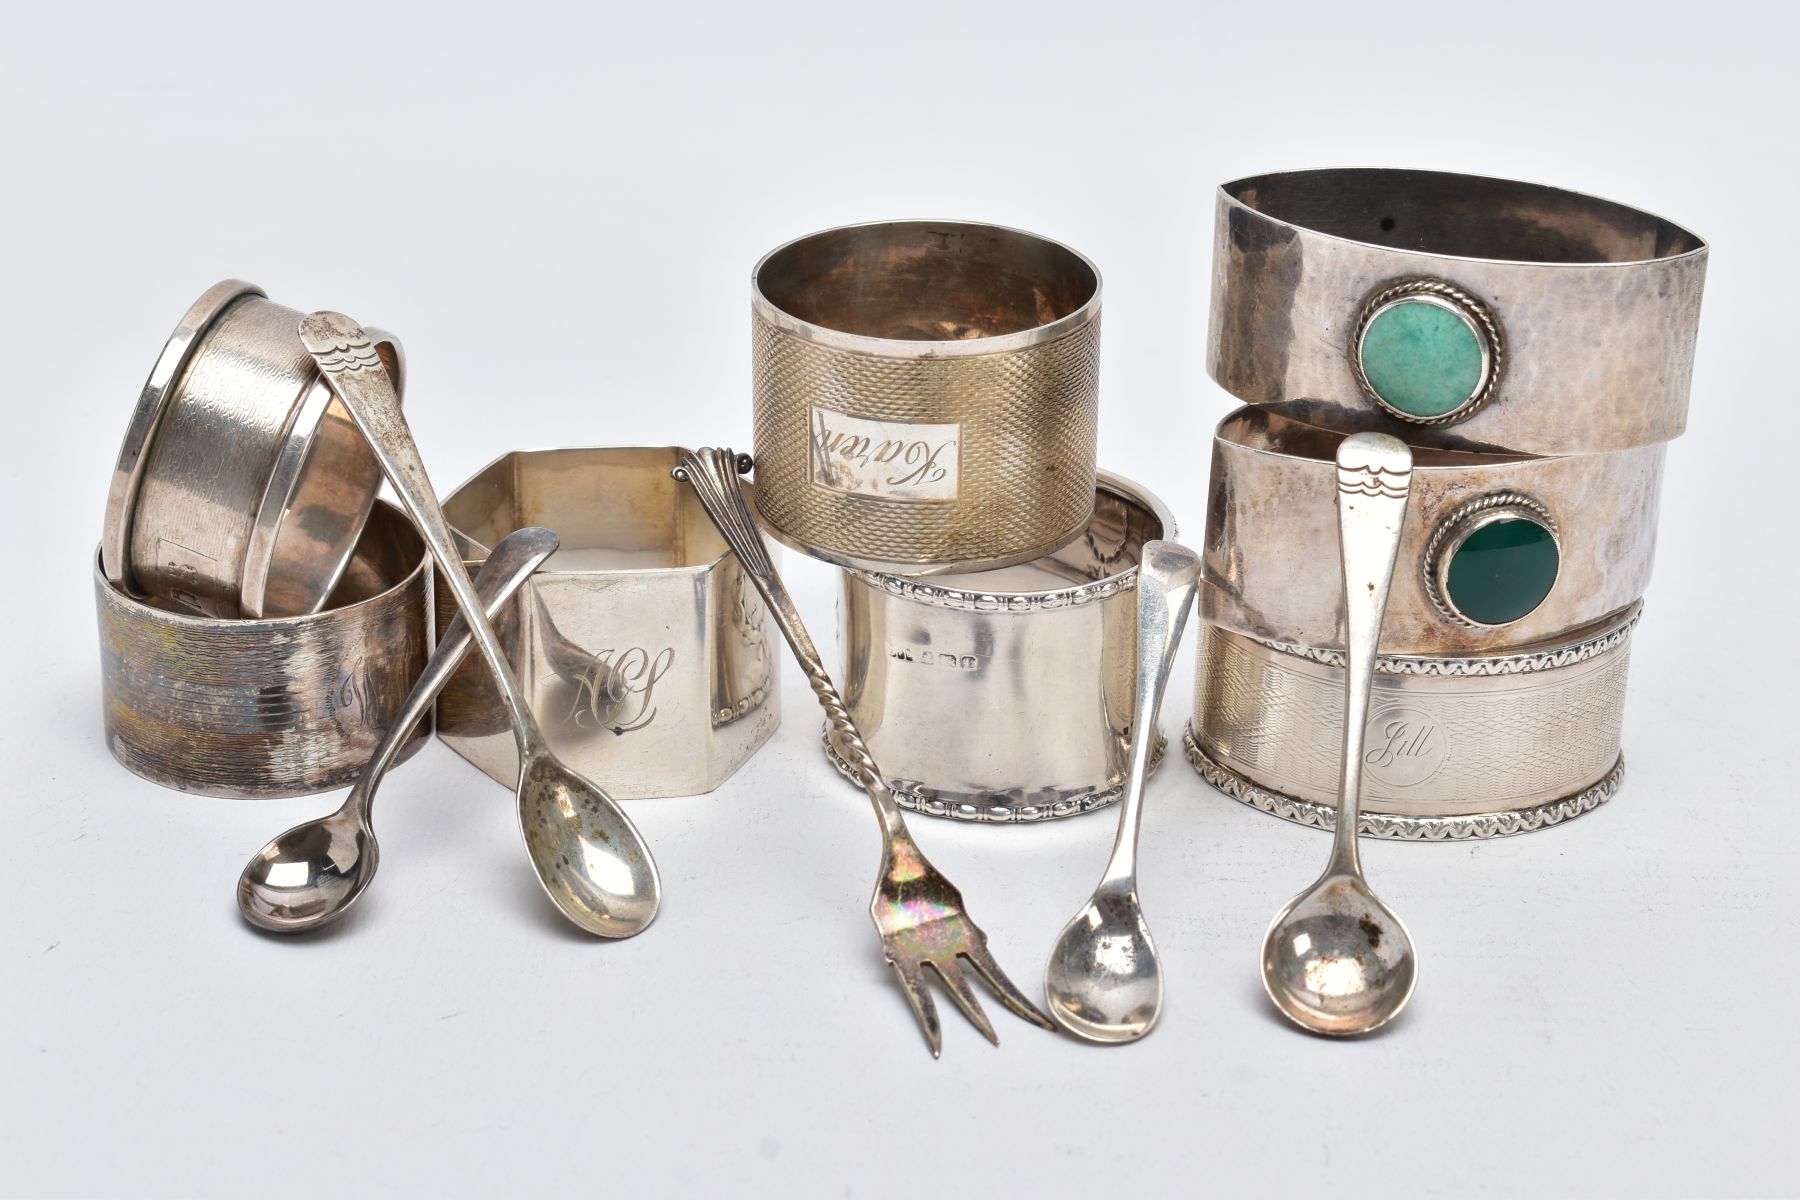 AN ASSORTEMENT OF SILVER NAPKIN RINGS AND SALT SPOONS, to include eight napkin rings of various